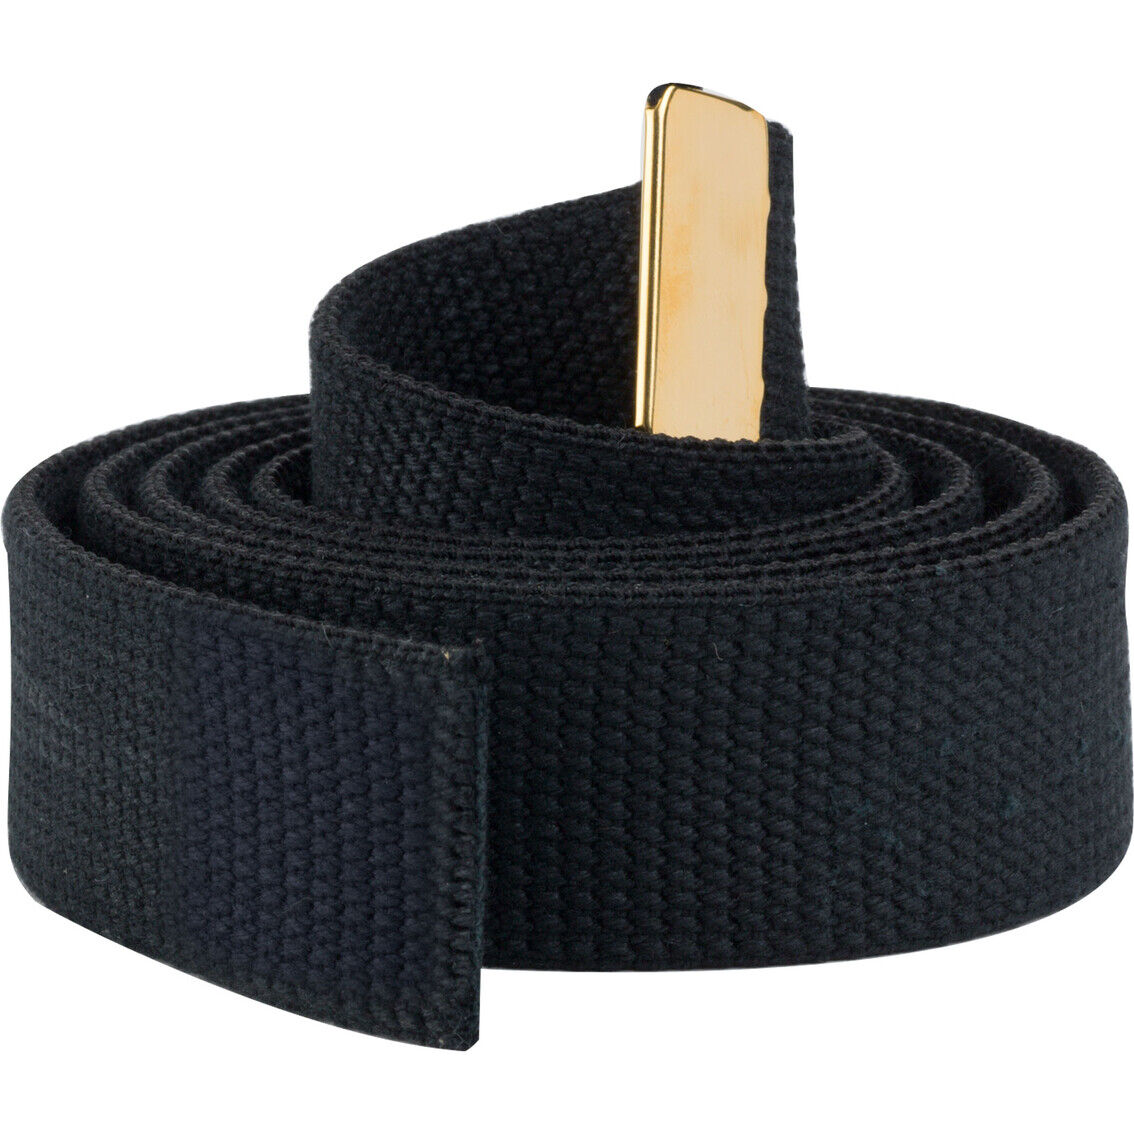 U.S MILITARY BLACK WEB BELT WITH BRASS TIP FOR USE WITH BRASS BUCKLE BELT ONLY  